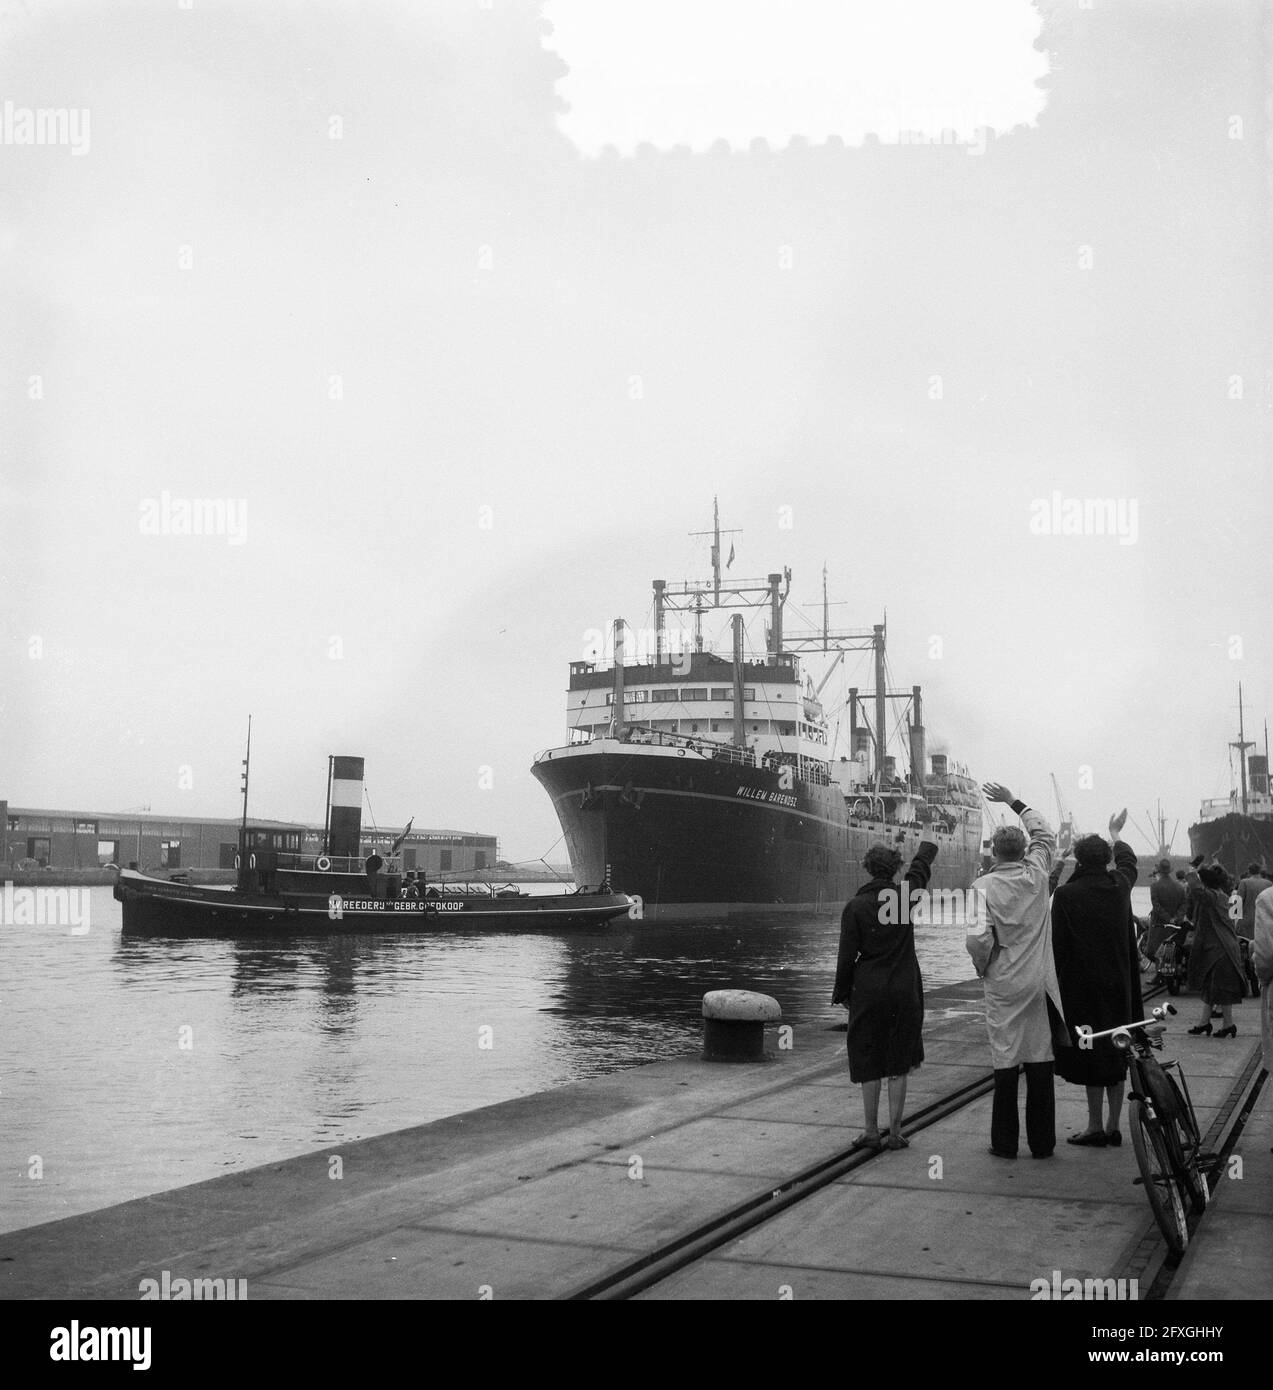 Departure of Willem Barends for whaling, 28 October 1953, DEPARTURE, ships, The Netherlands, 20th century press agency photo, news to remember, documentary, historic photography 1945-1990, visual stories, human history of the Twentieth Century, capturing moments in time Stock Photo